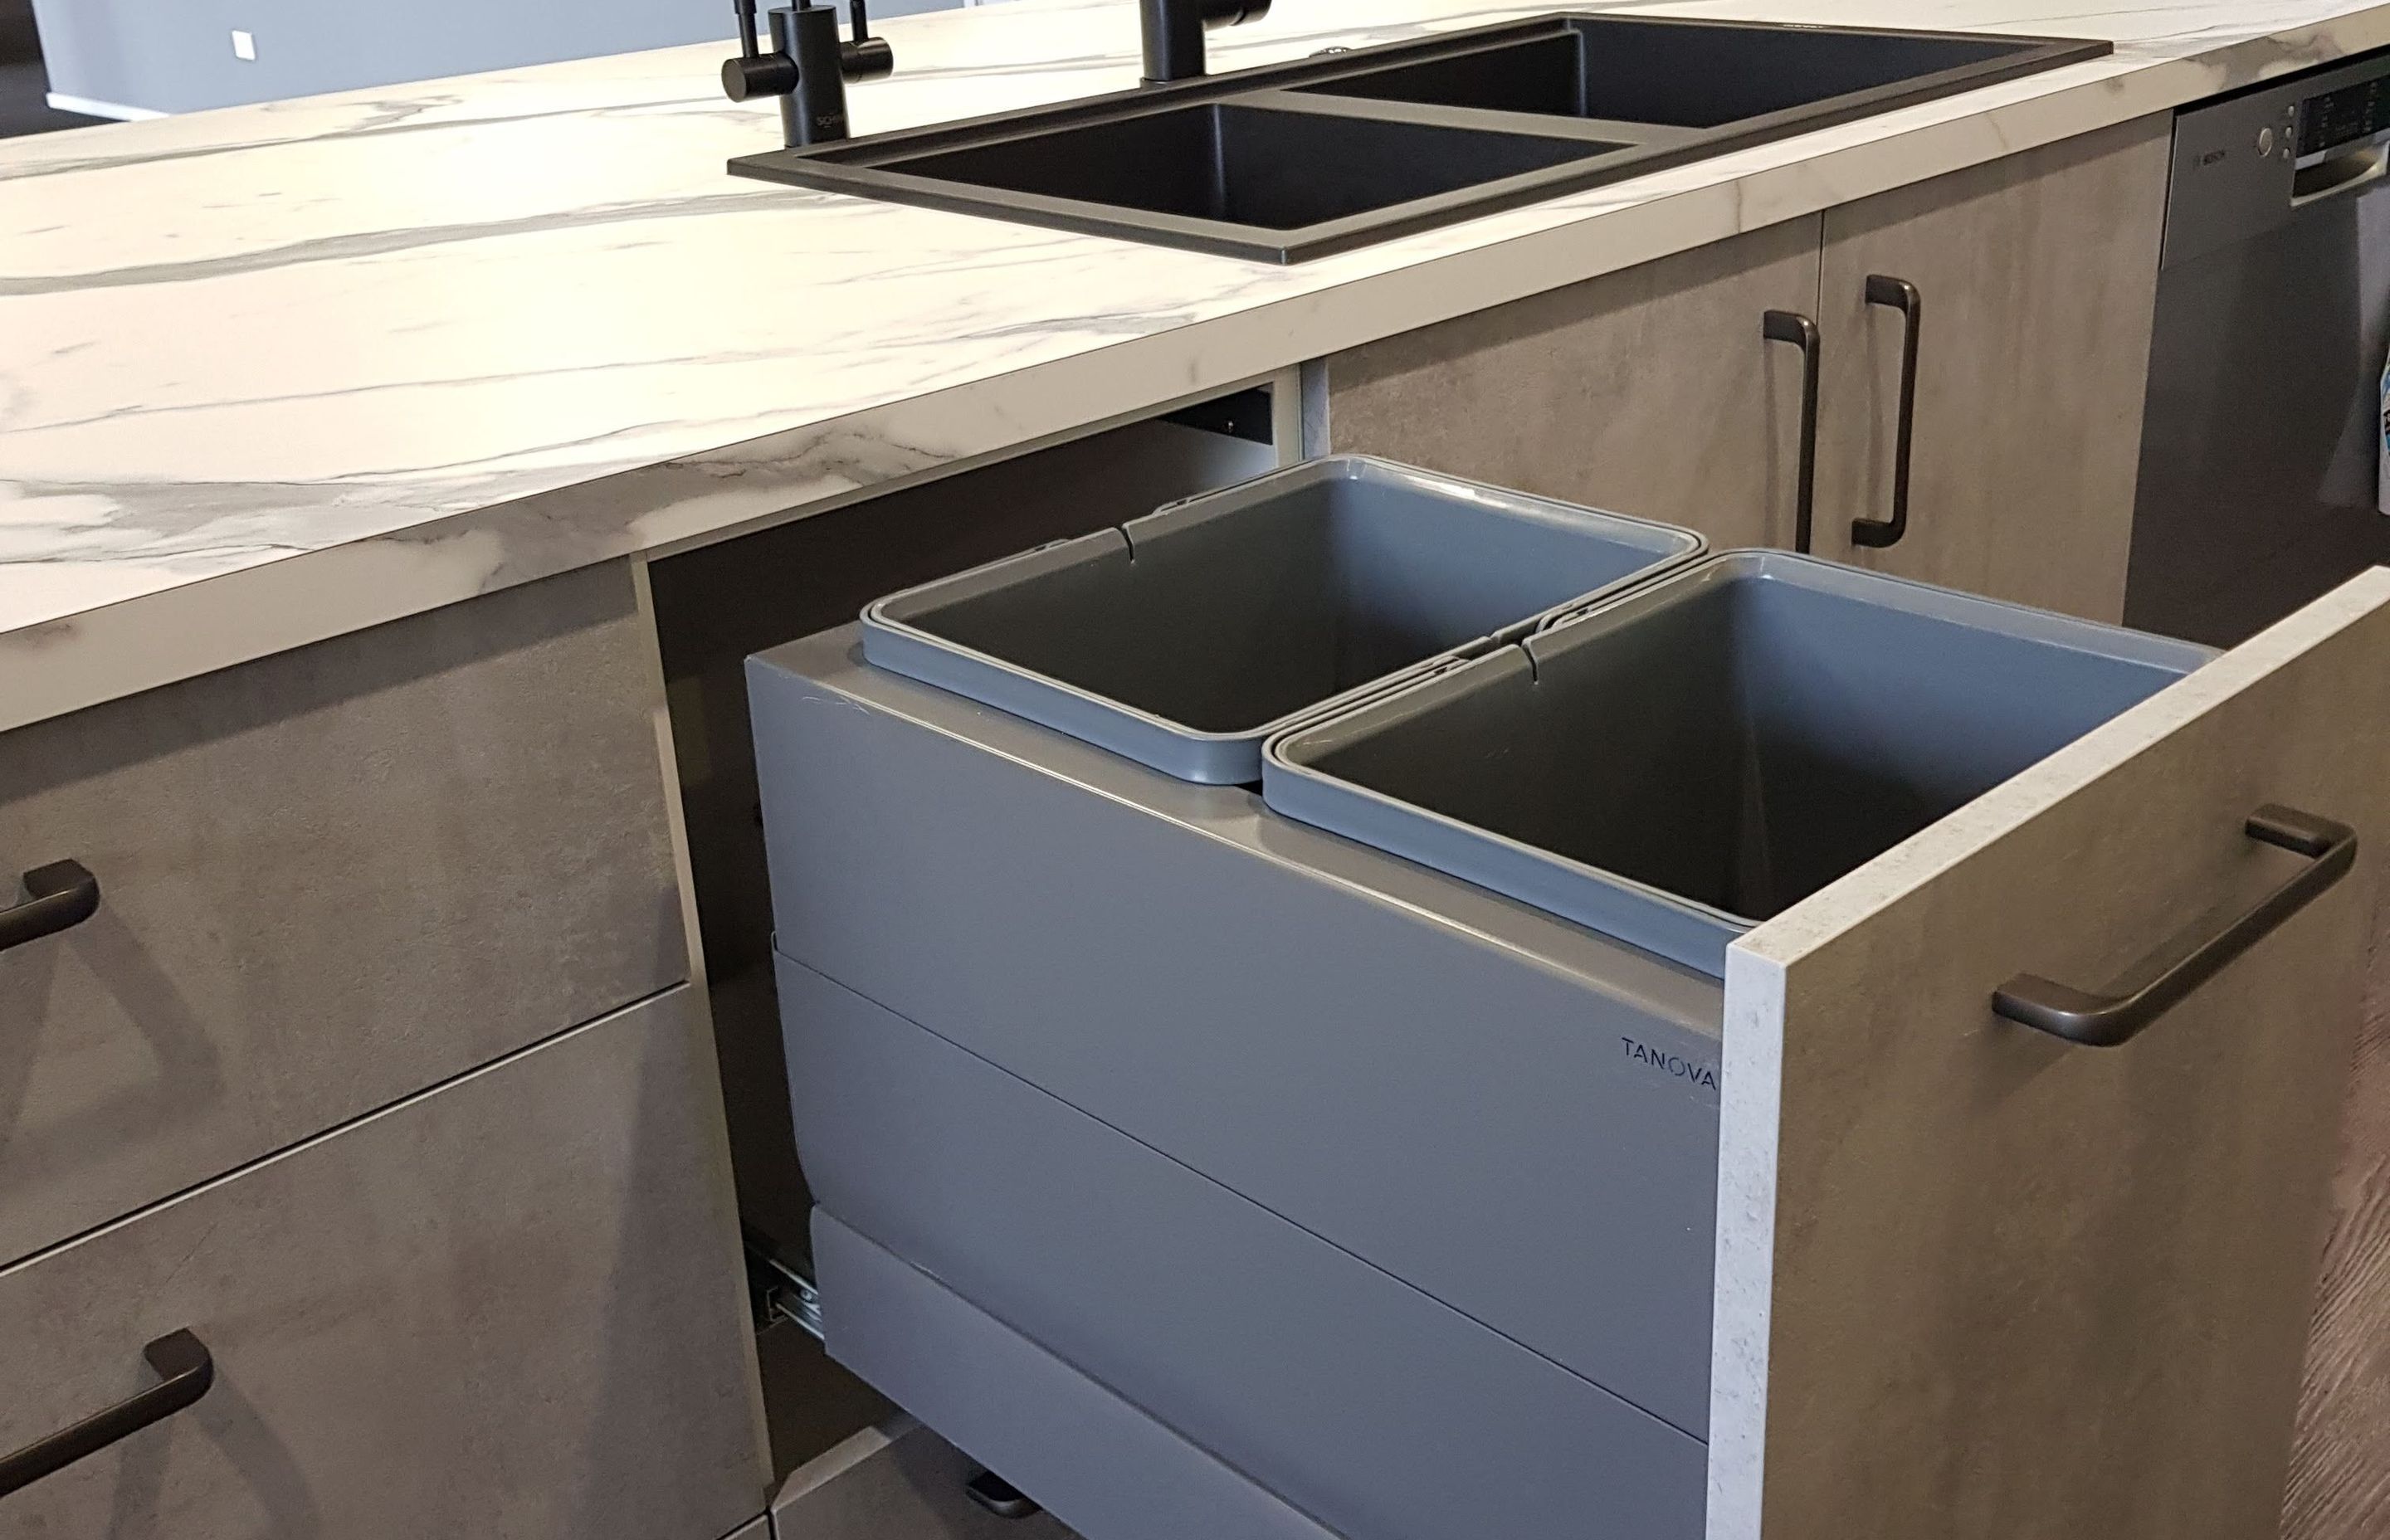 Tanova Designer Series Soft Close Kitchen Bin - Many Models Available for Cabinets from 300mm to 800mm Wide and in Grey and White Colour Options